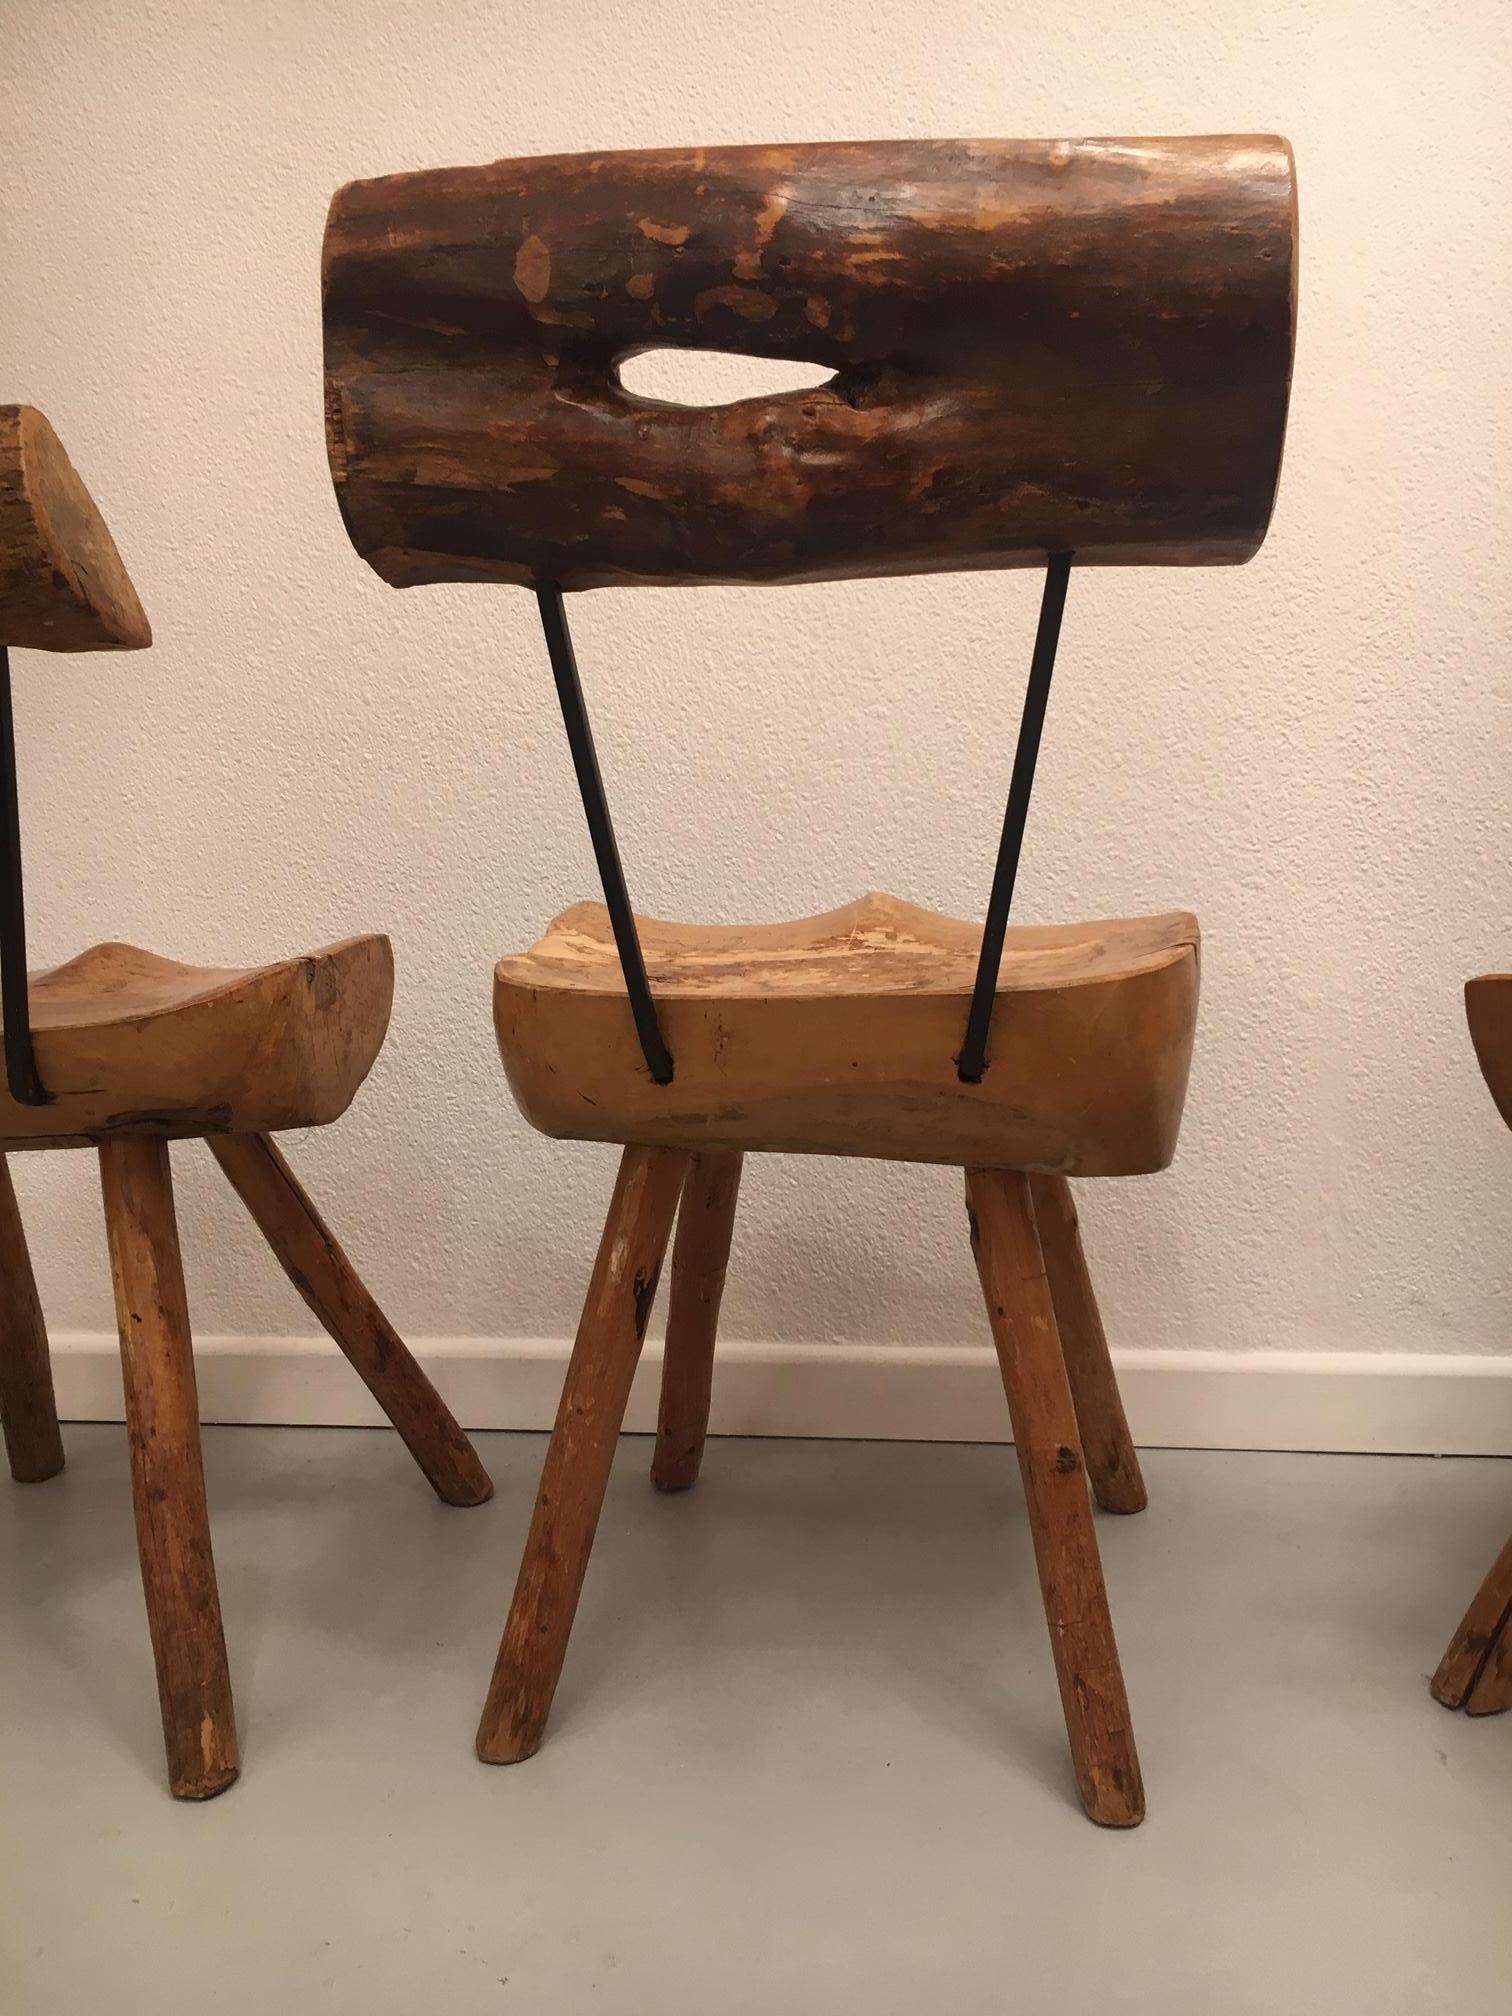 Set of 5 Solid Olive Wood Brutalist Rustic Dining Chairs, circa 1950s For Sale 6